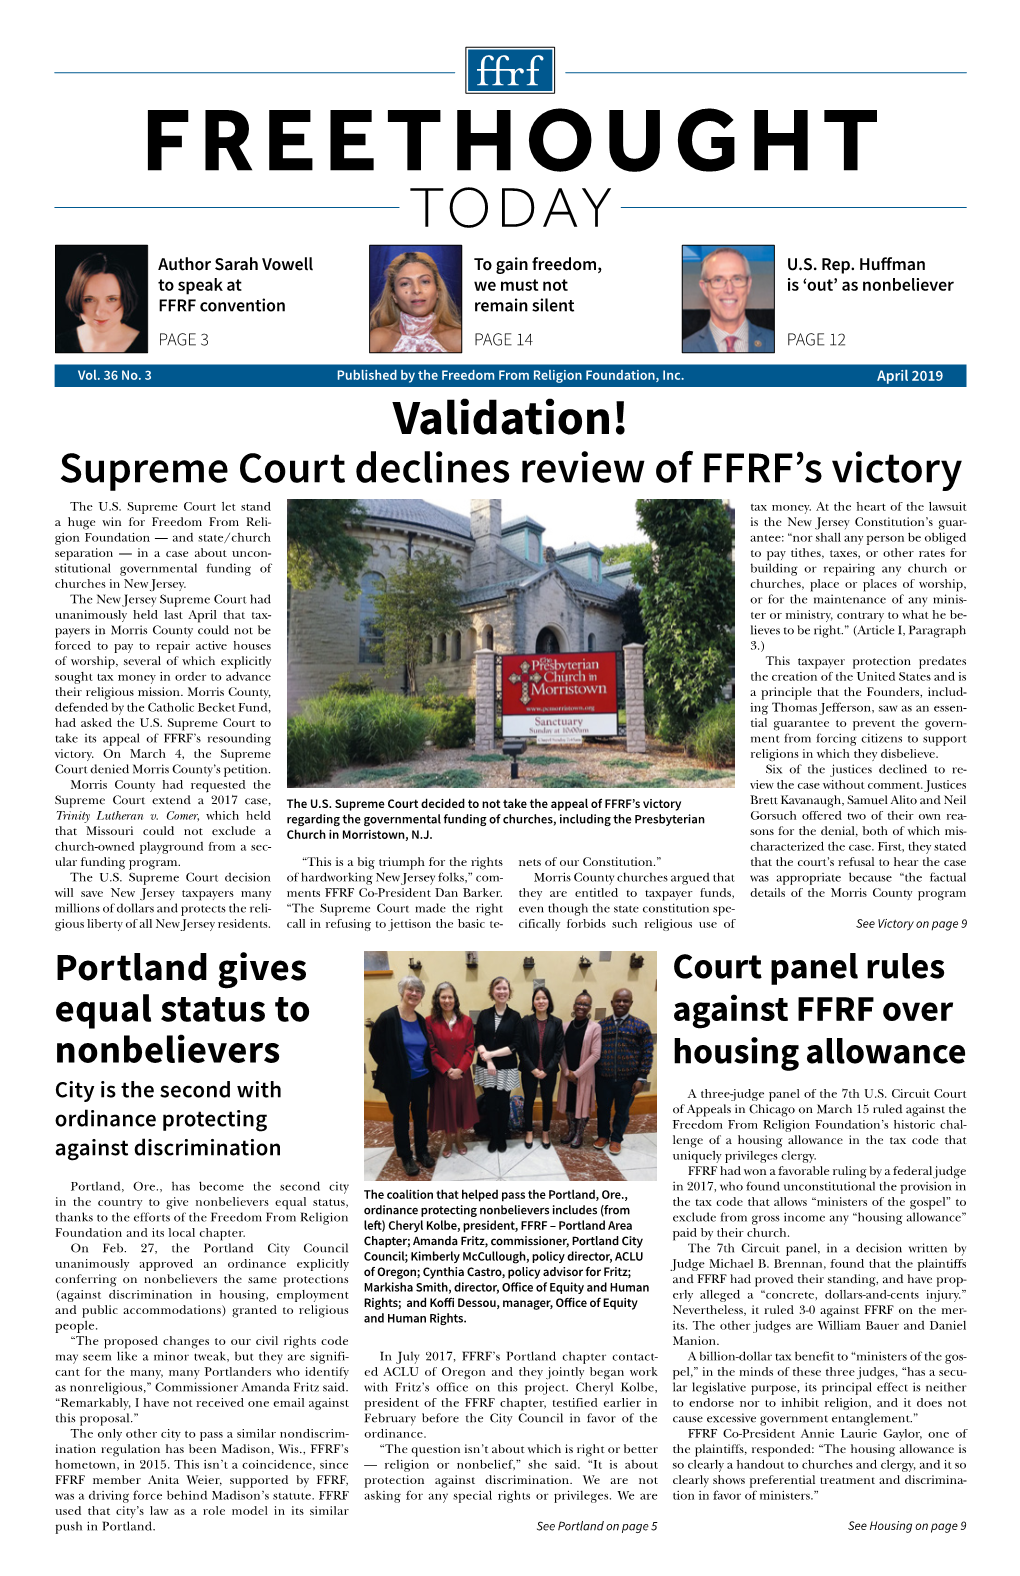 April 2019 Validation! Supreme Court Declines Review of FFRF’S Victory the U.S